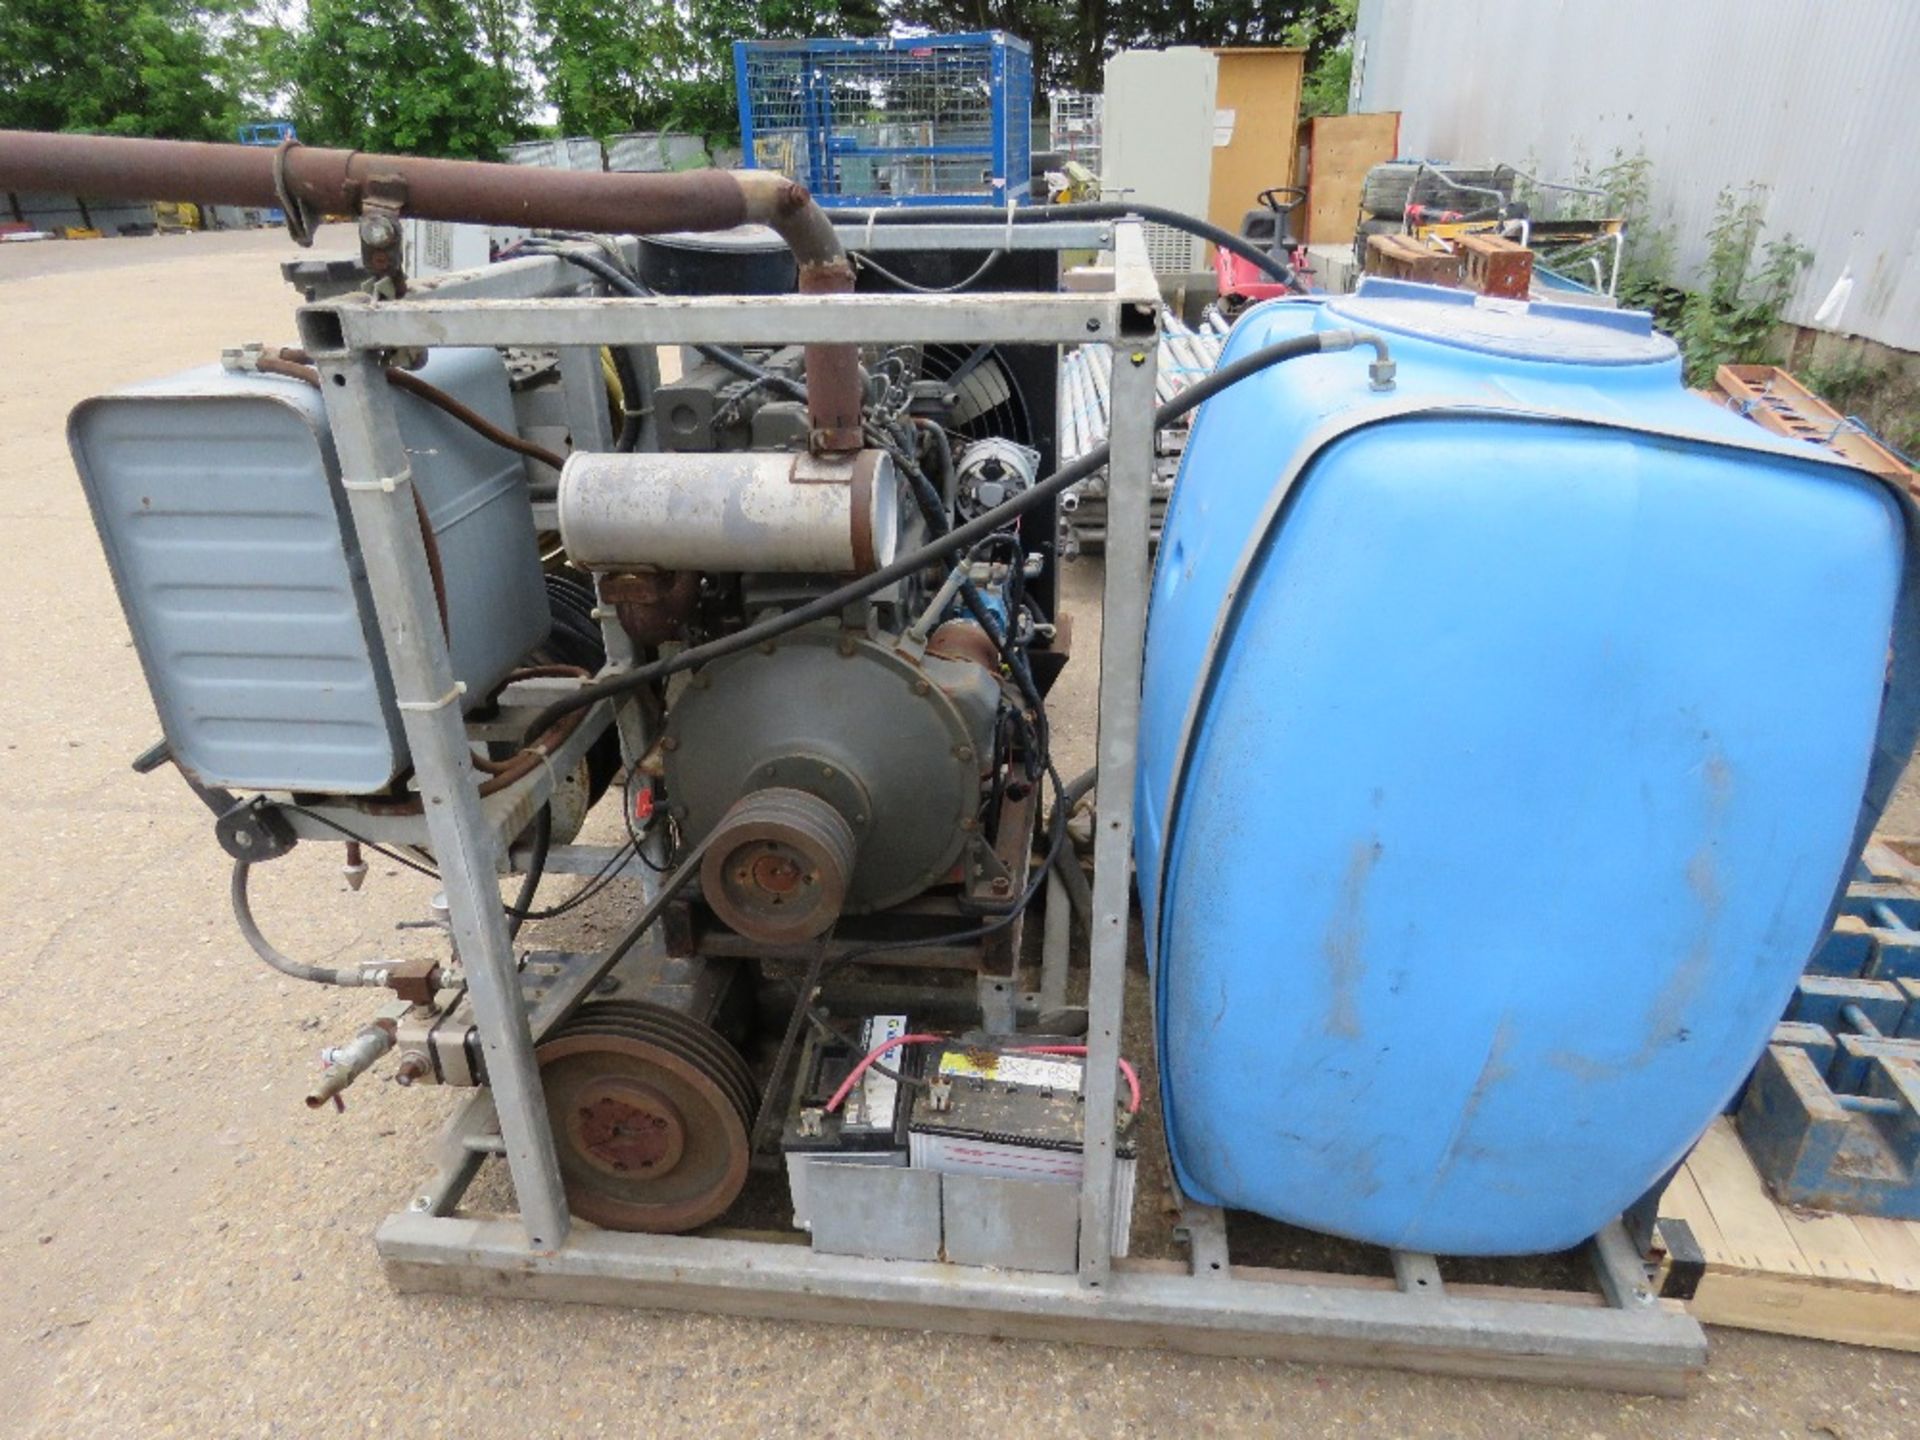 DEUTZ 3 CYLINDER POWERED HIGH PRESSURE DRAIN JETTER WITH TANK AND HOSE. WHEN TESTED WAS SEEN TO RUN - Image 2 of 5